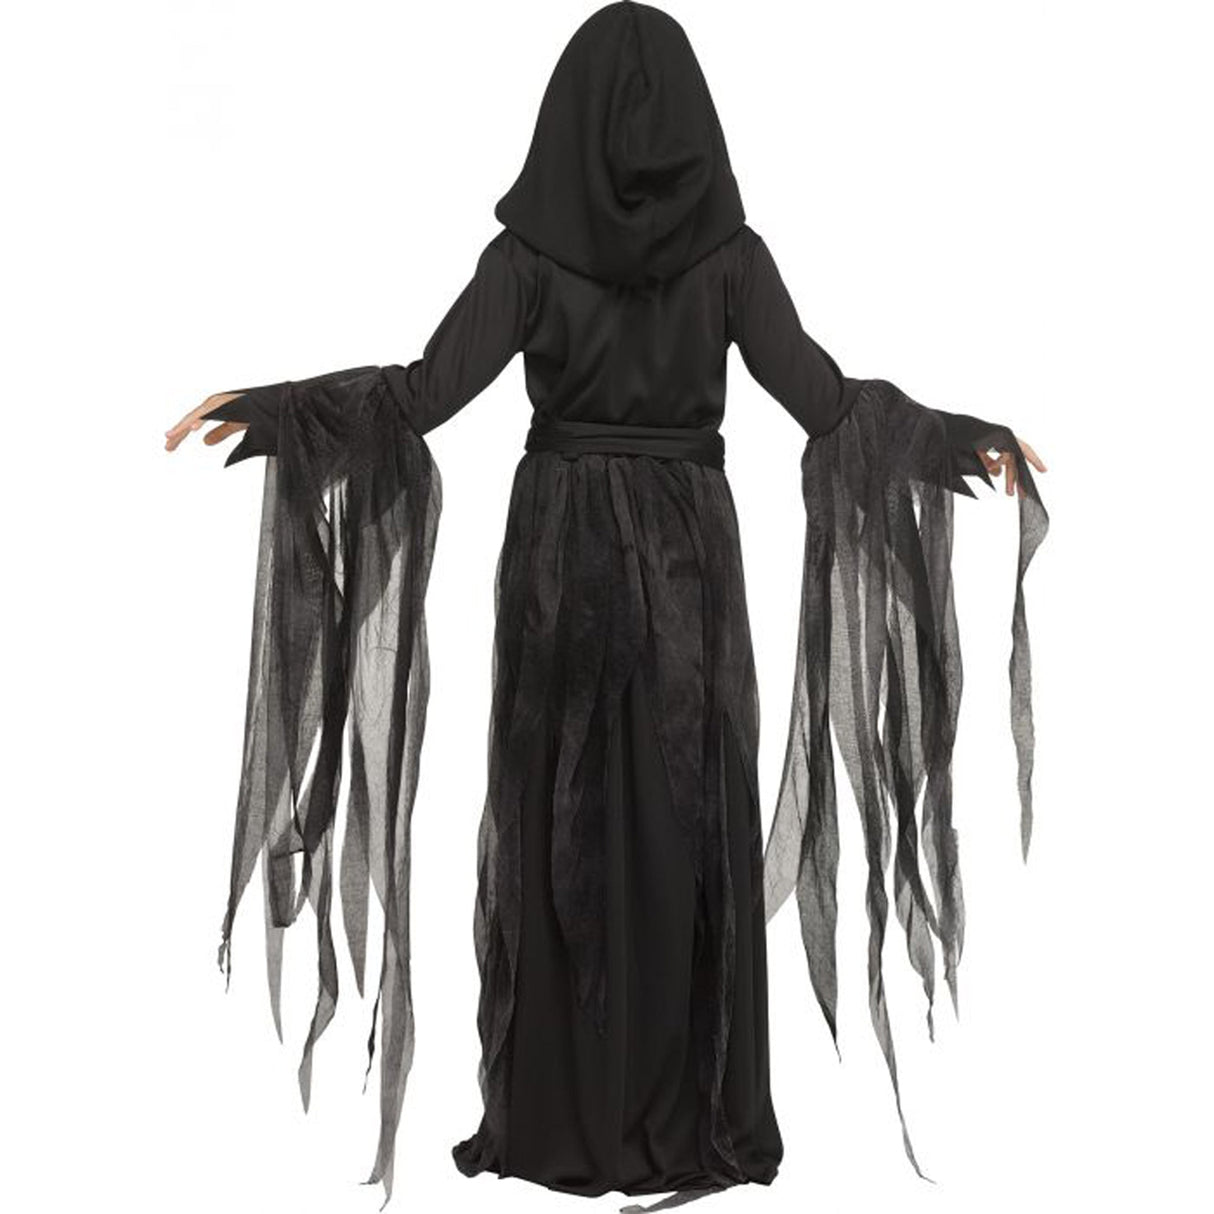 FUN WORLD Costumes Soulless Reaper Costume for Kids, Black and Red Dress